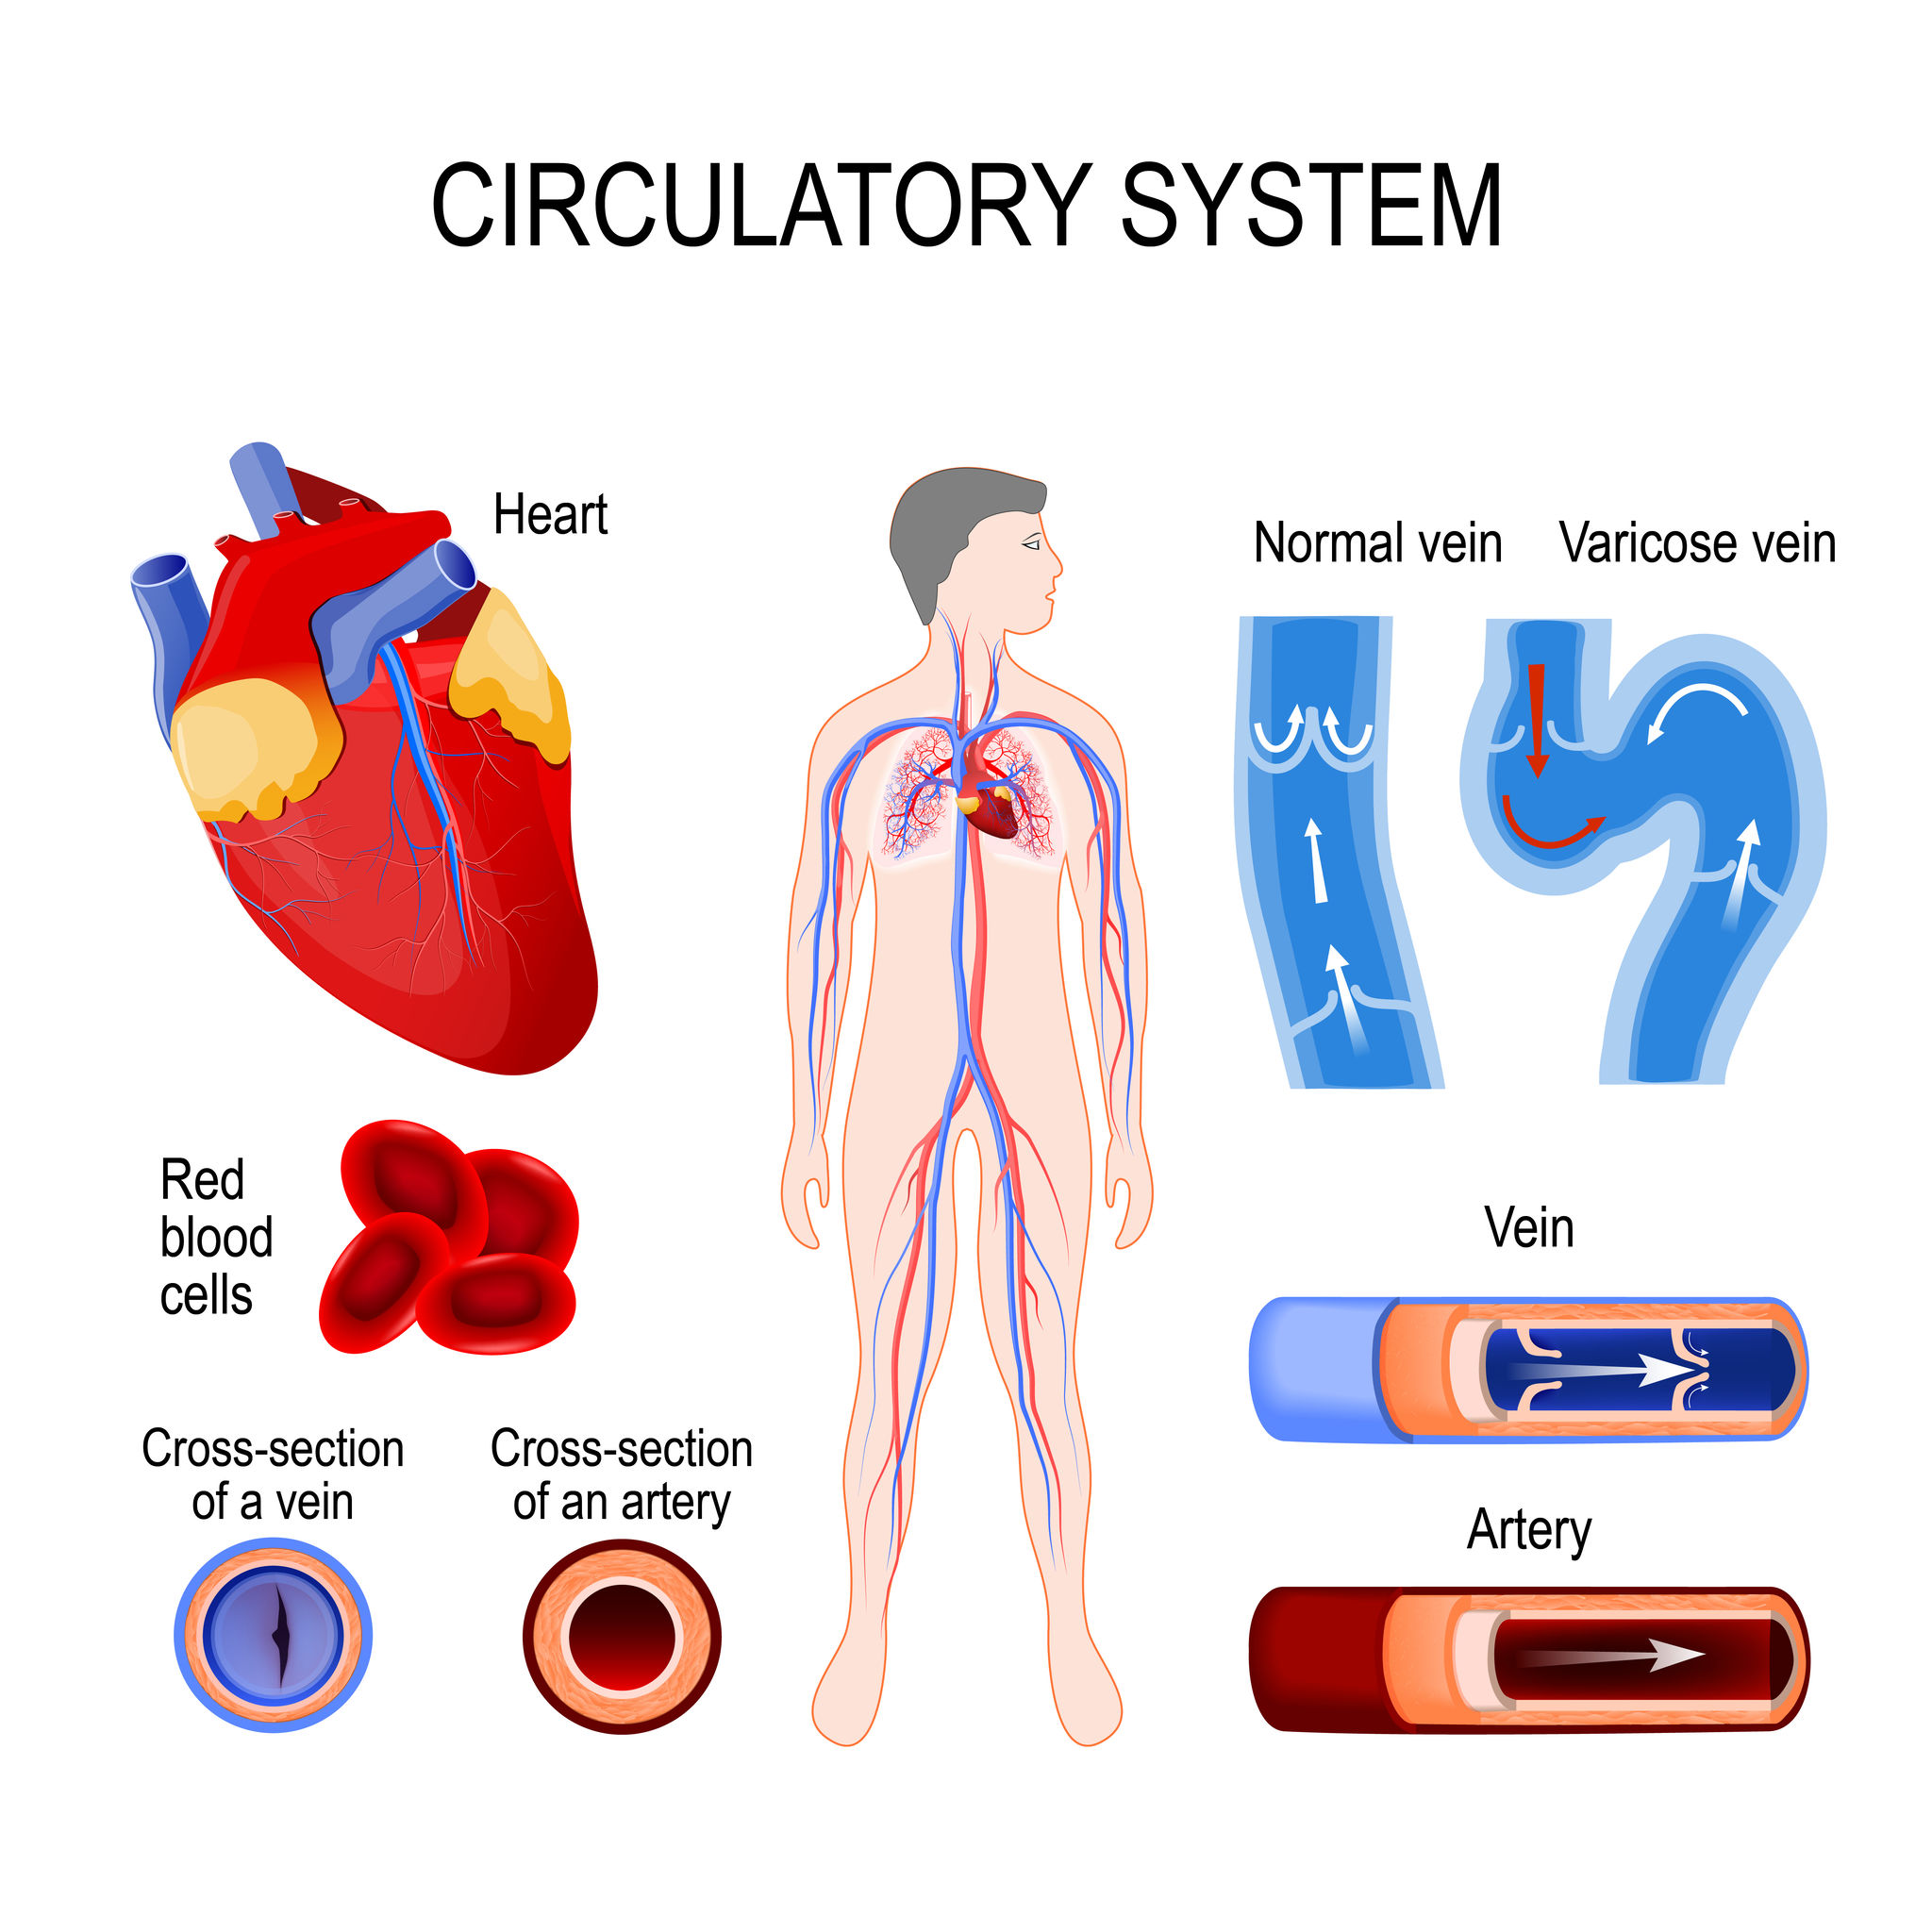 circulatory system: heart, cross-section artery and vein, normal